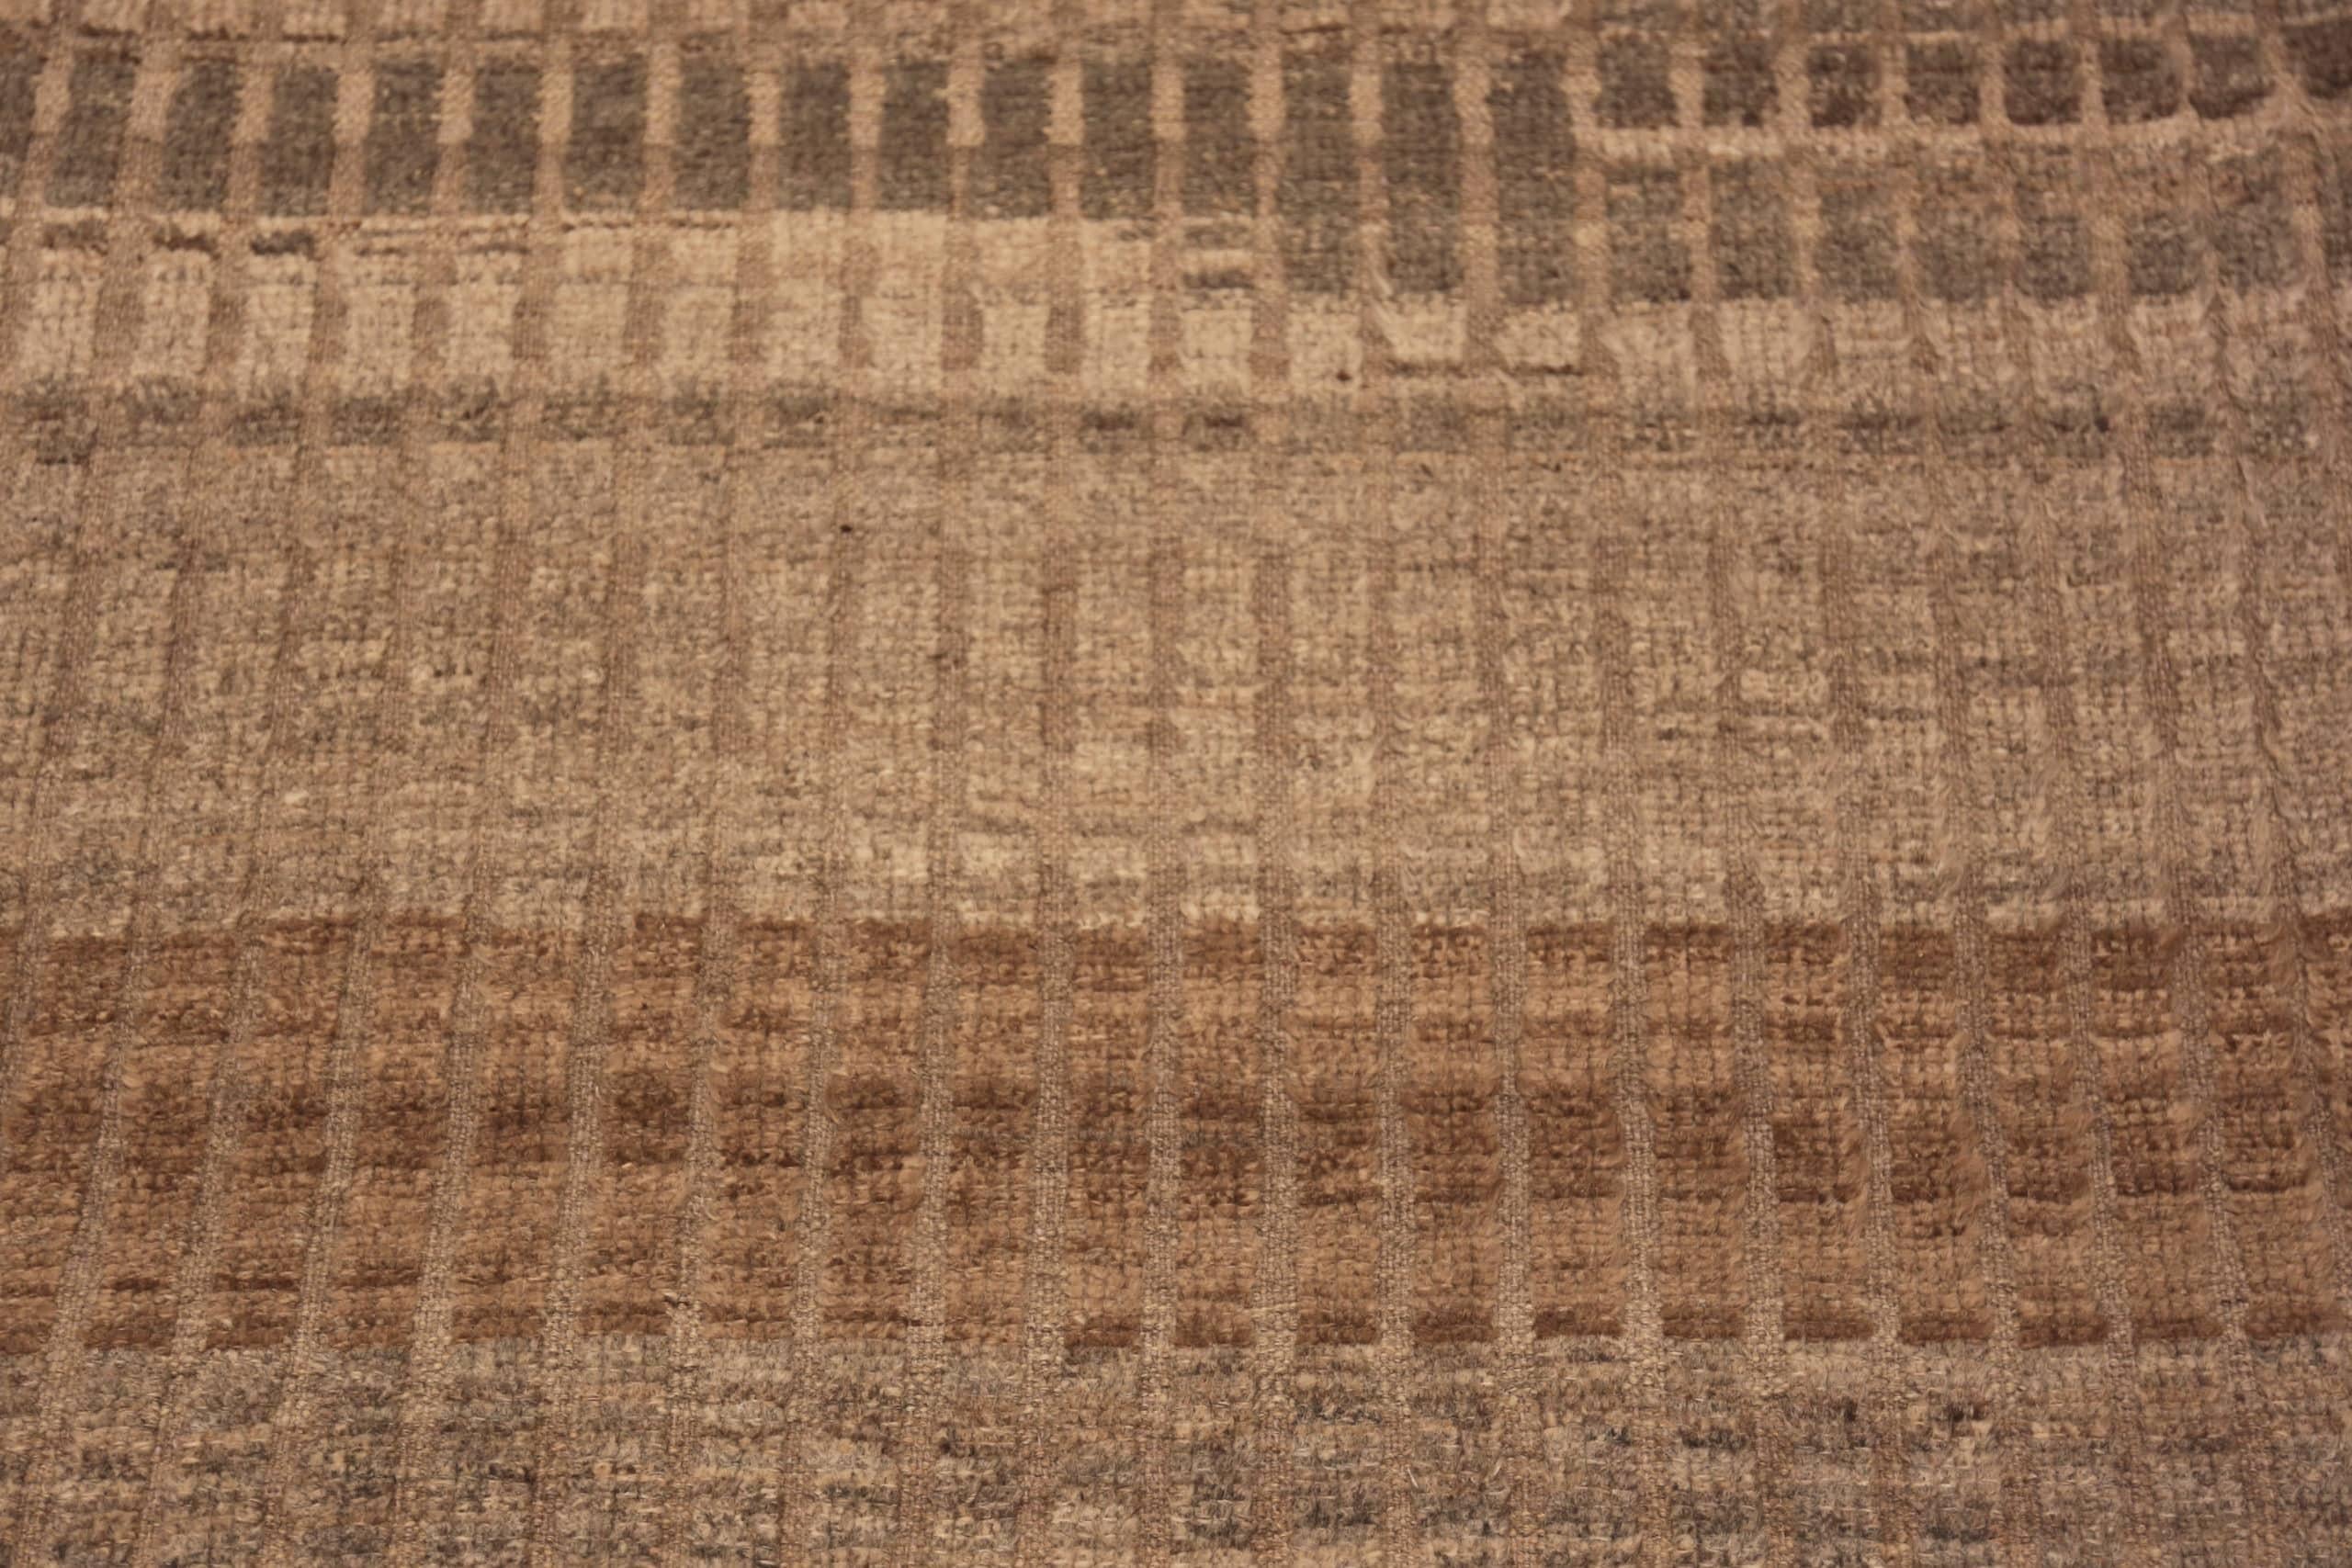 Contemporary Nazmiyal Collection Earthy Tones Modern Moroccan Rug. 3 ft x 9 ft 8 in  For Sale